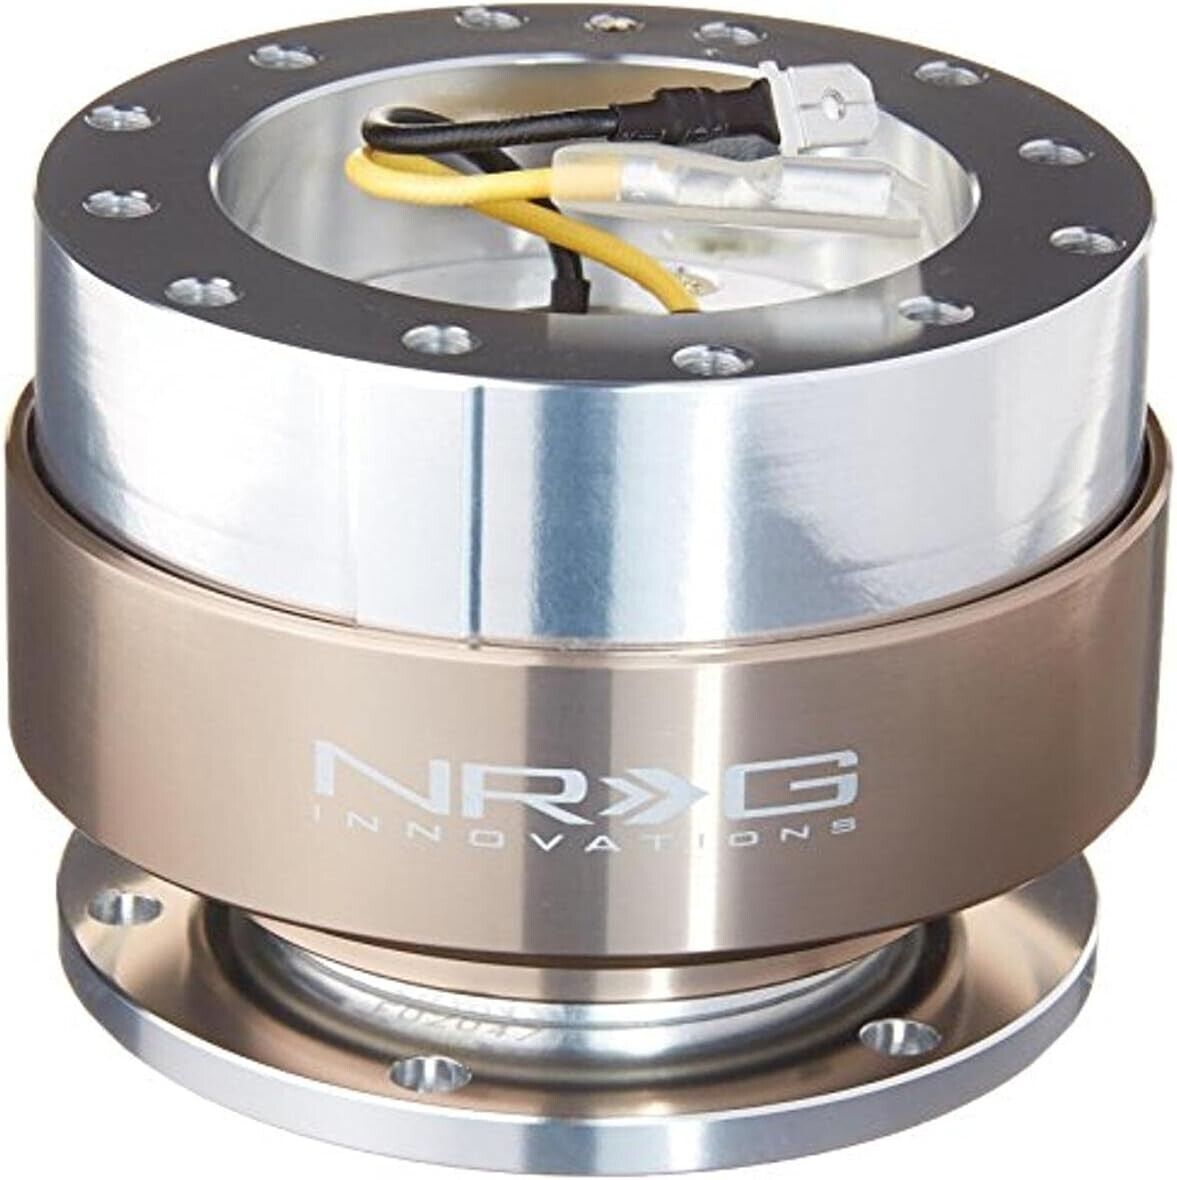 NRG Innovations SRK-100TI Forged Quick Release Steering Wheel Boss Hub Silver